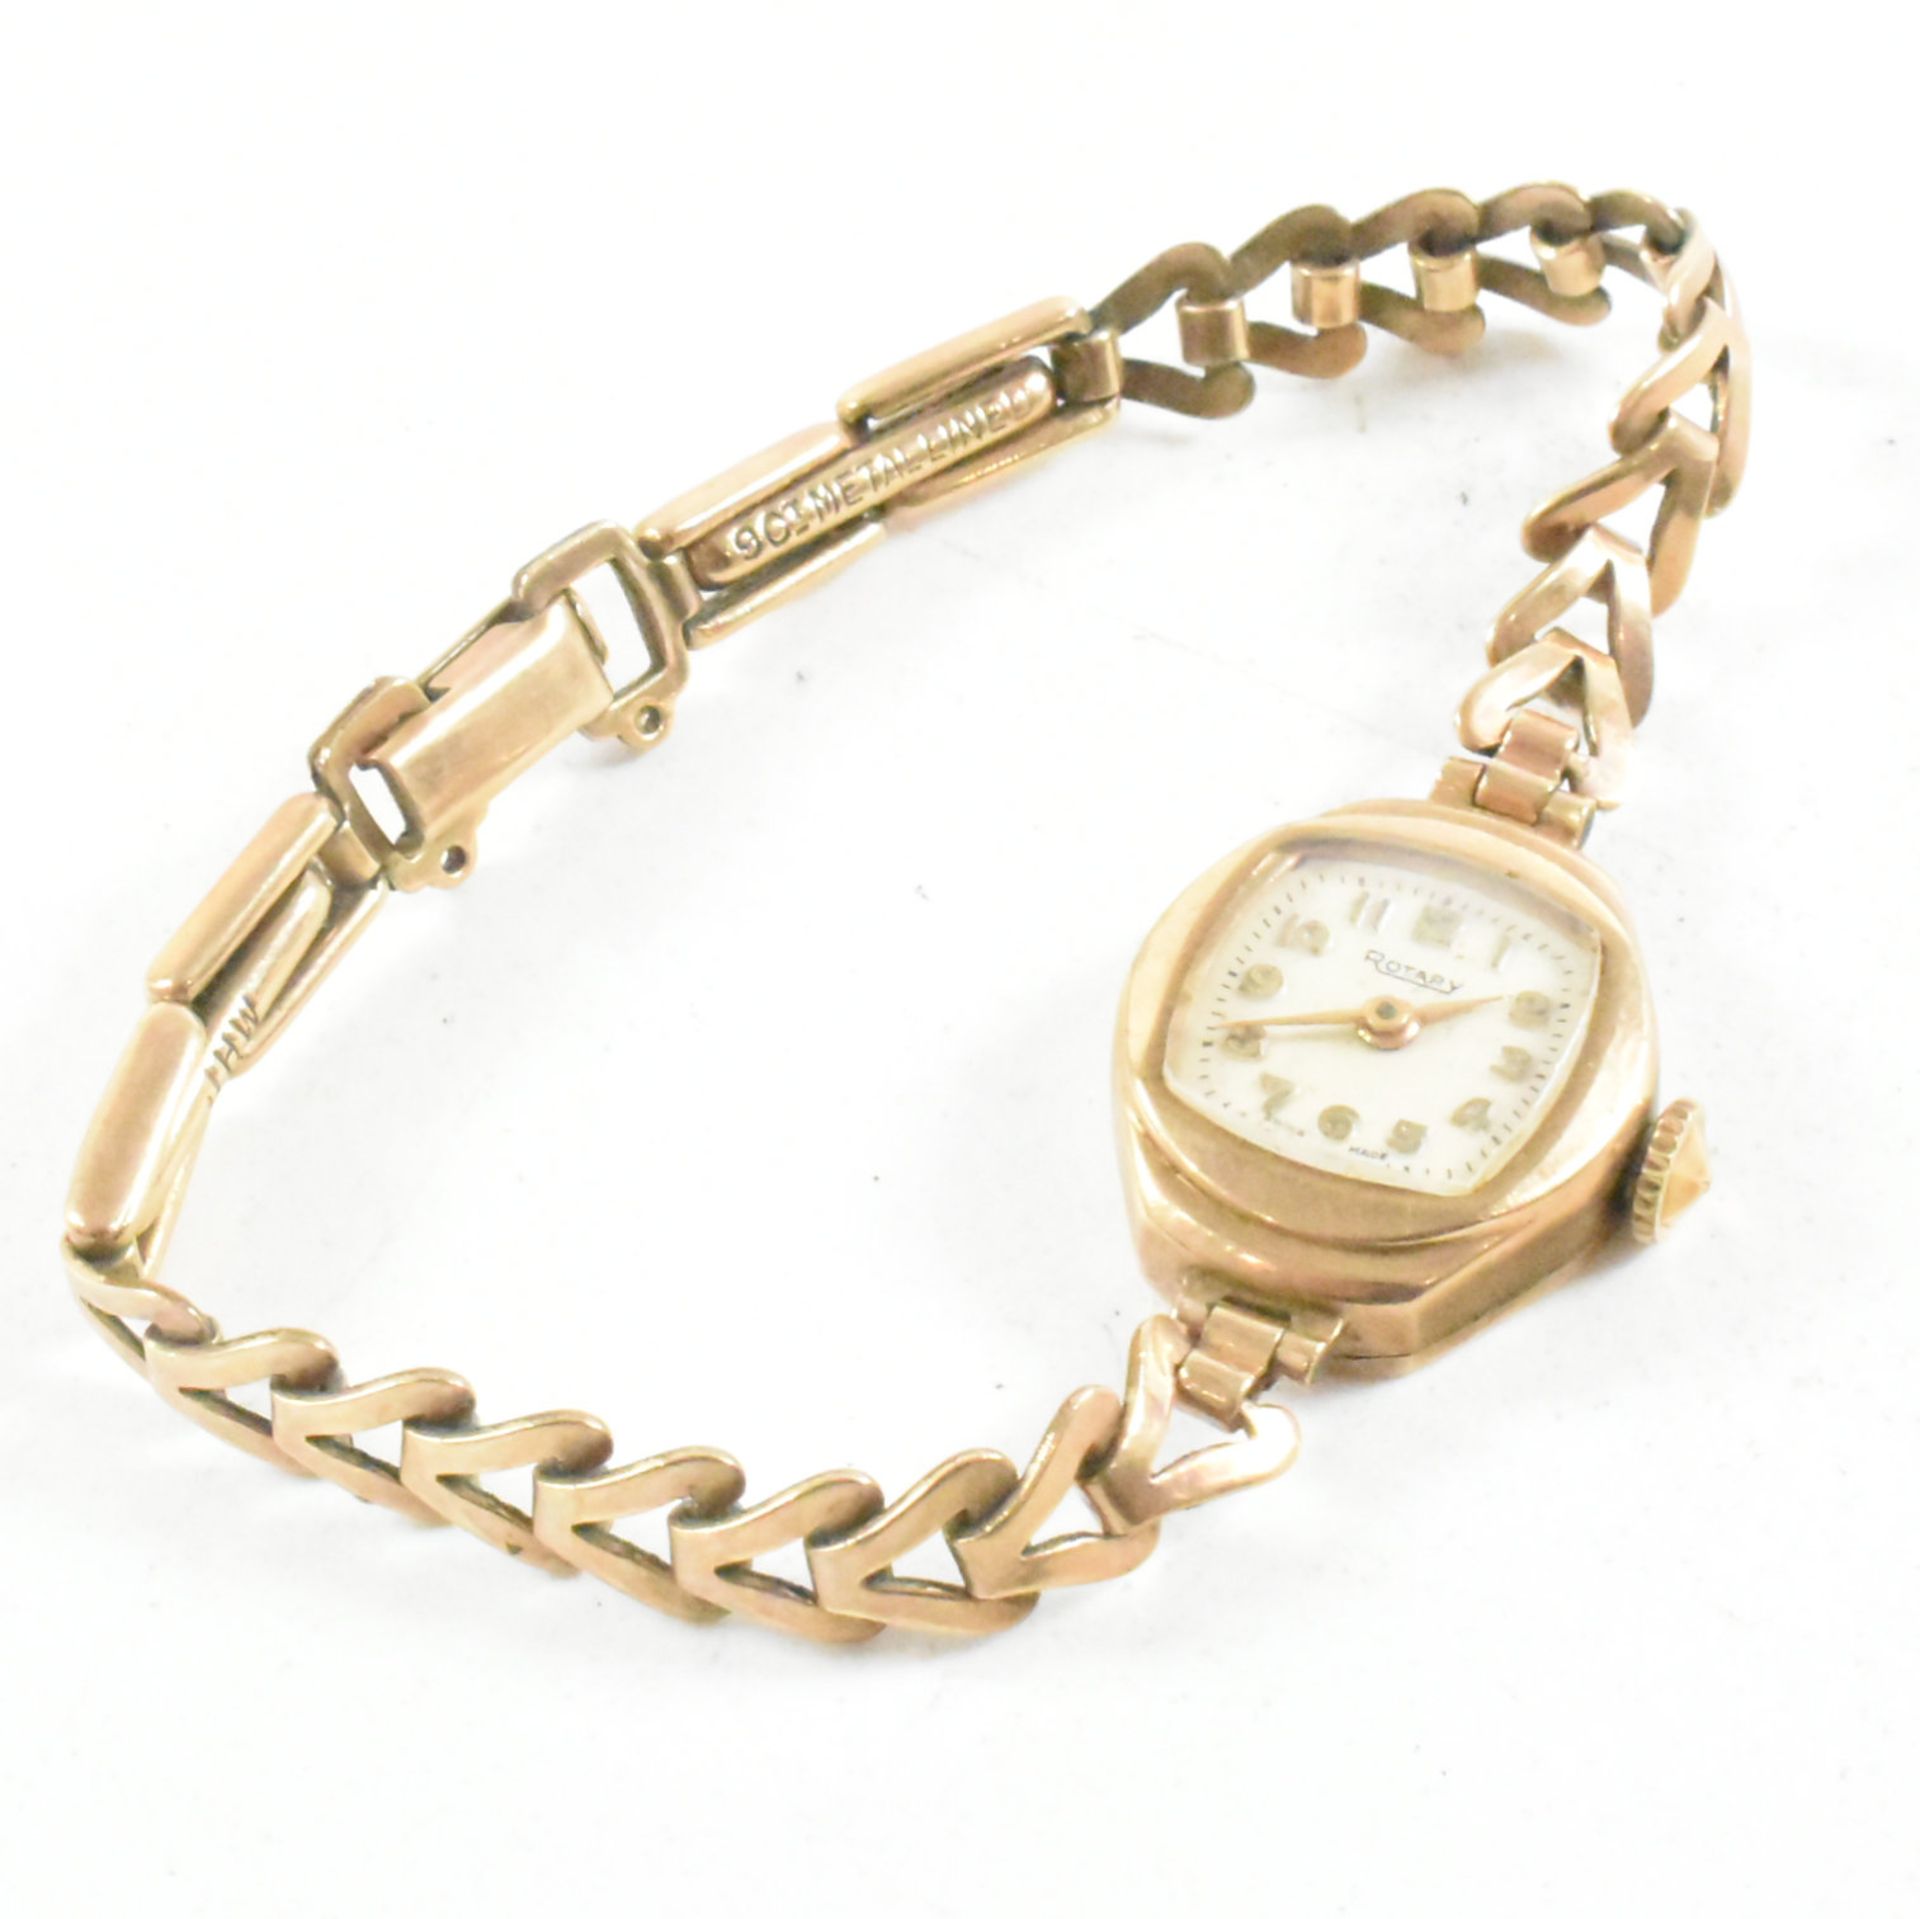 1960S HALLMARKED 9CT GOLD ROTARY WATCH WITH METAL LINED STRAP - Image 9 of 11